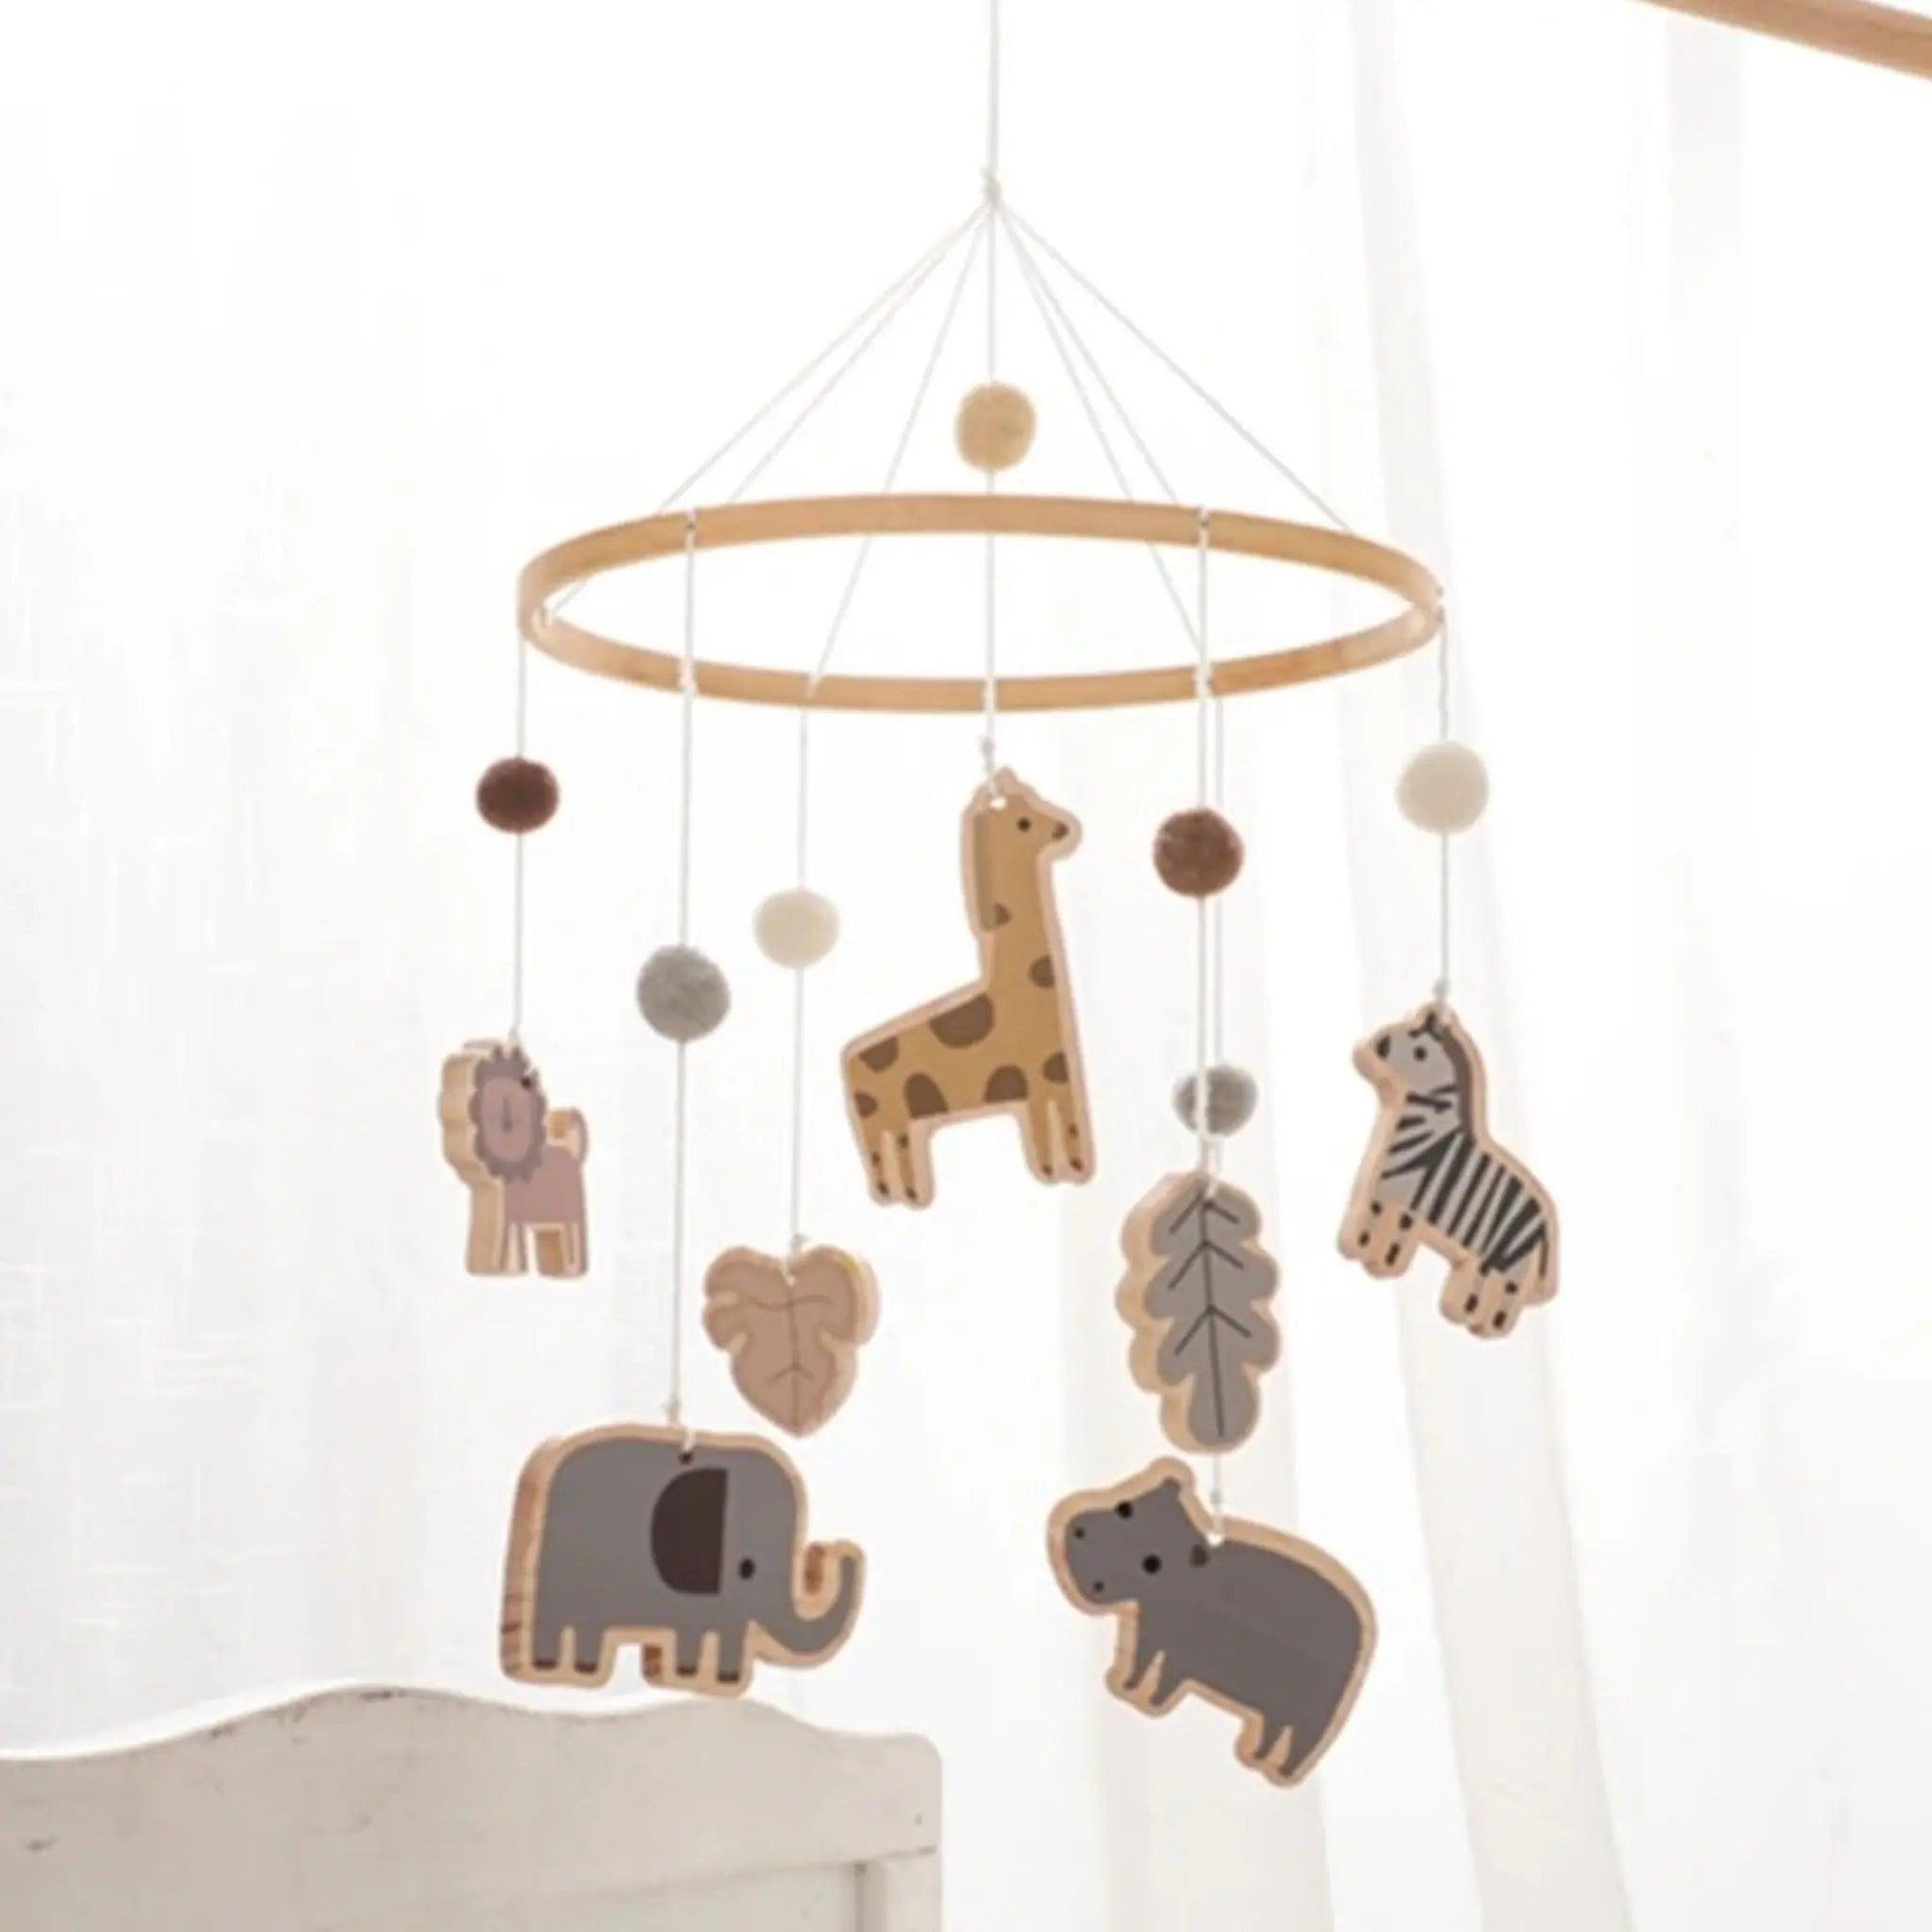 Animal Theme Wooden Crib Mobile Hanging Toy Rattles for Nursery, Color